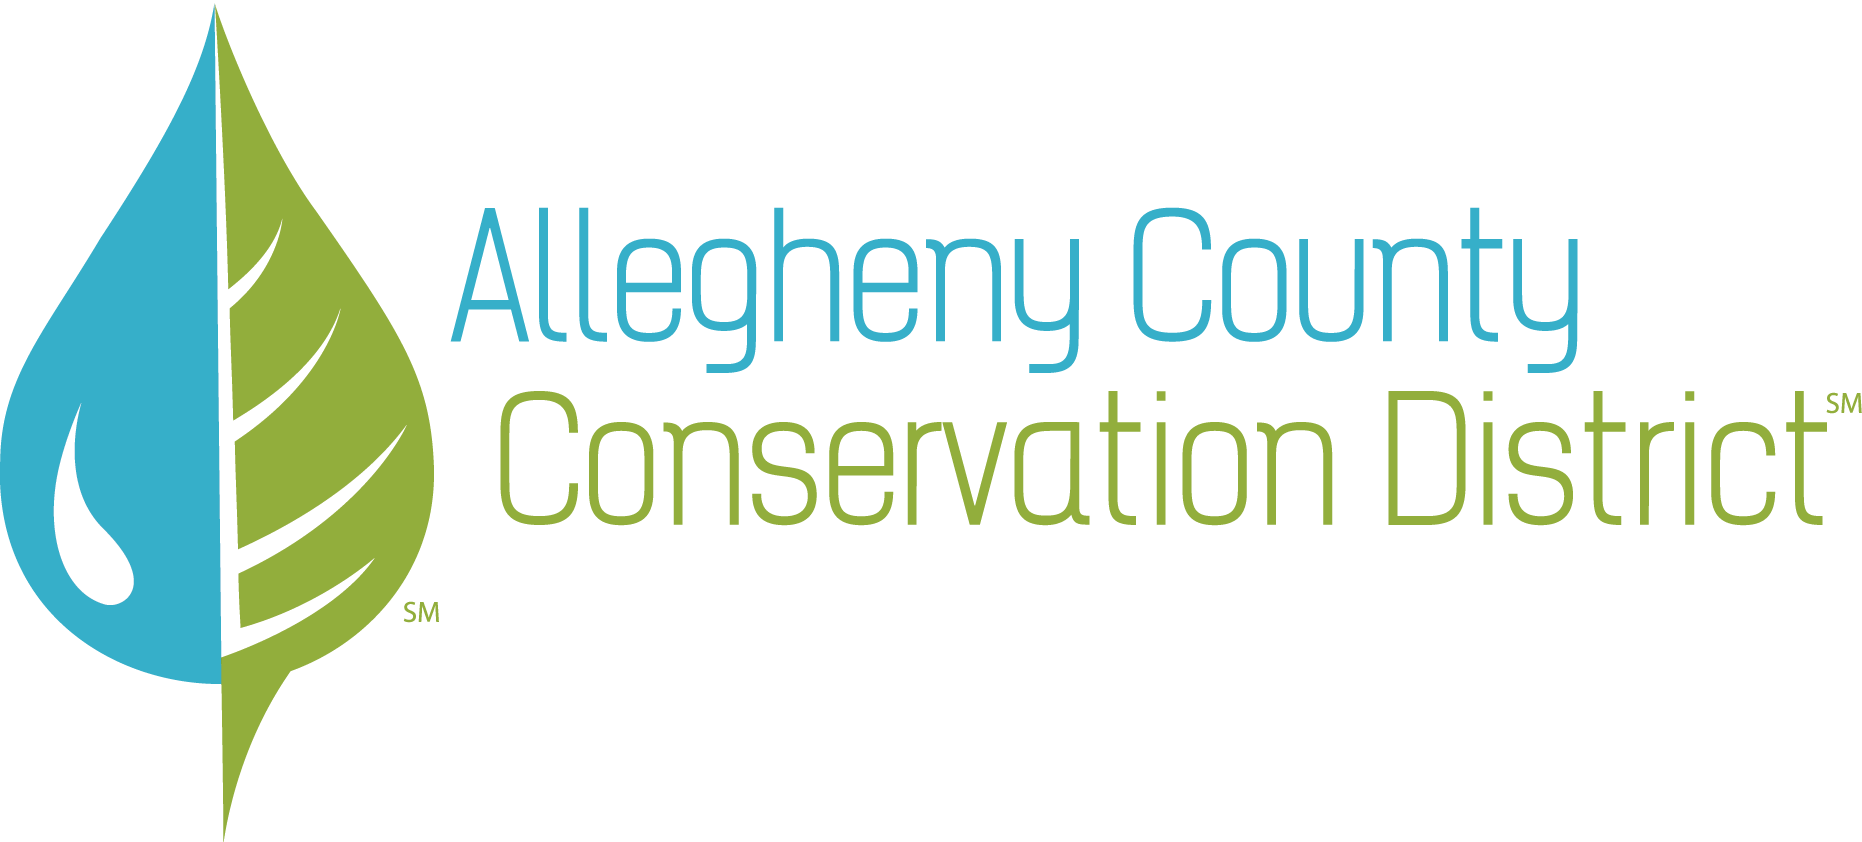 Conservation Logo - Allegheny County Conservation District